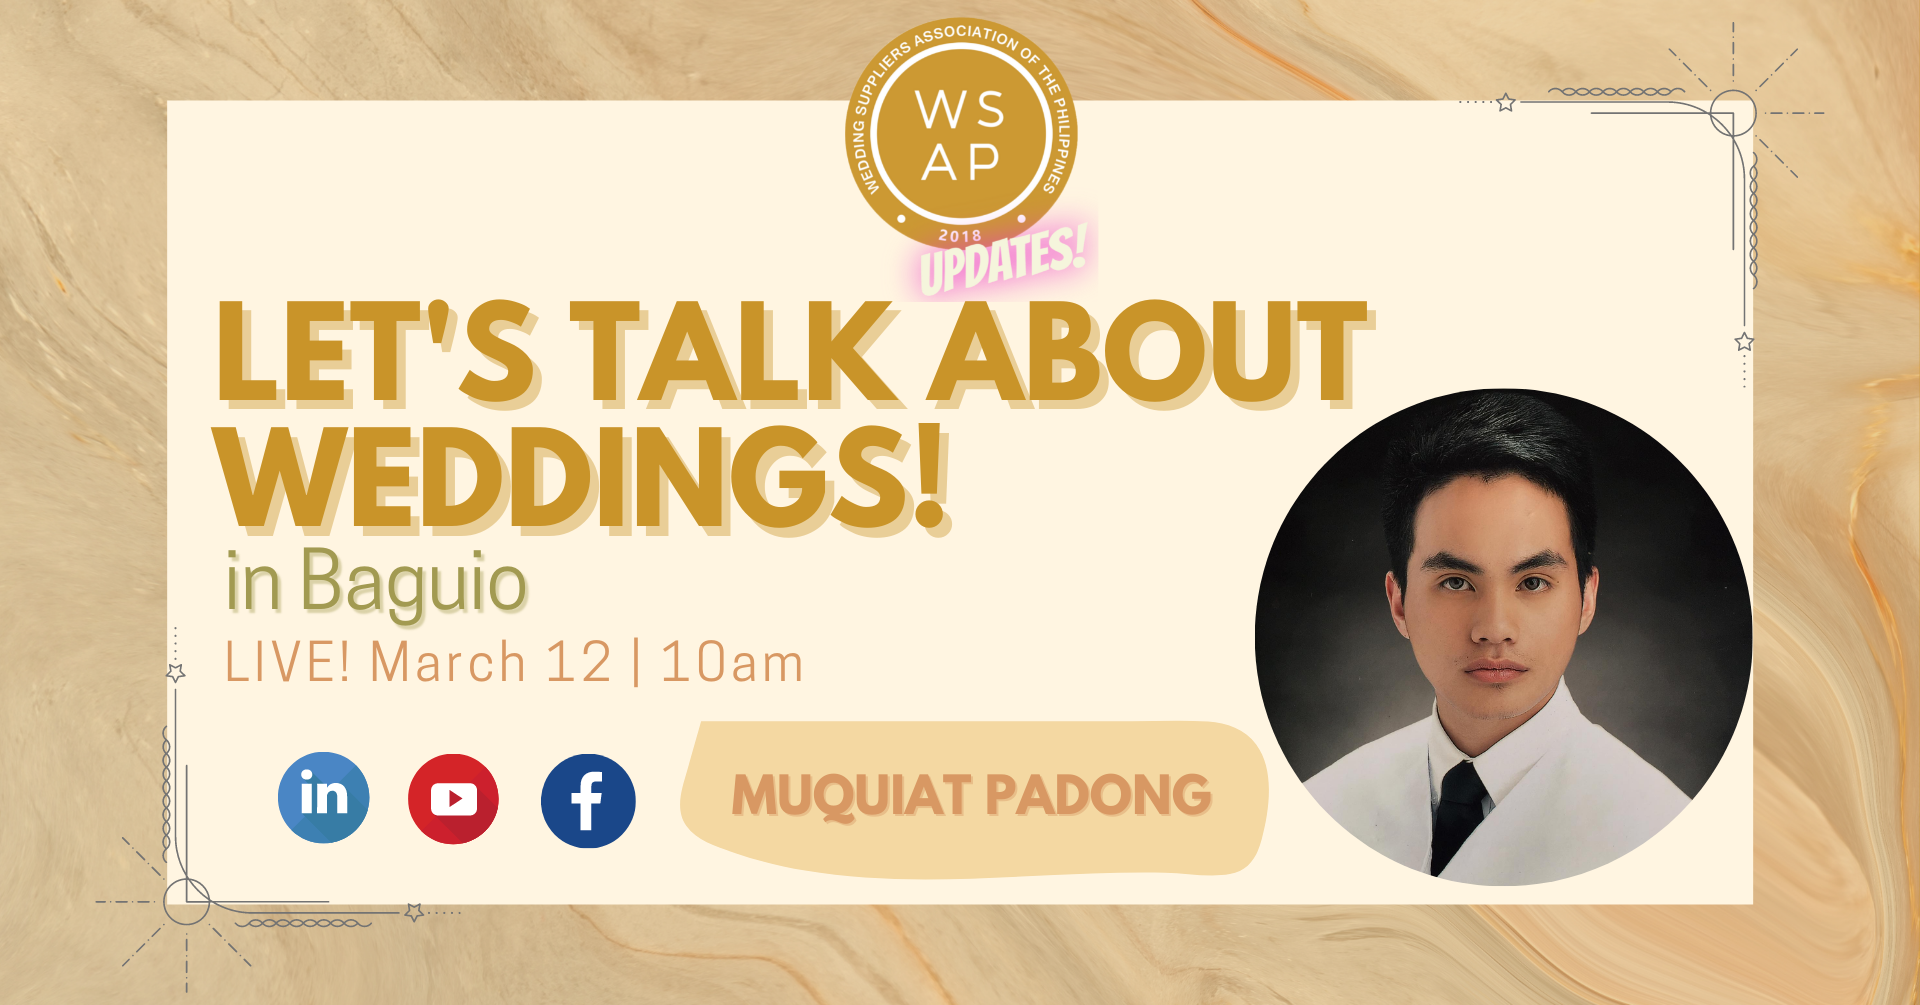 Let's Talk About Weddings in Baguio with Mr. Muquiat Padong